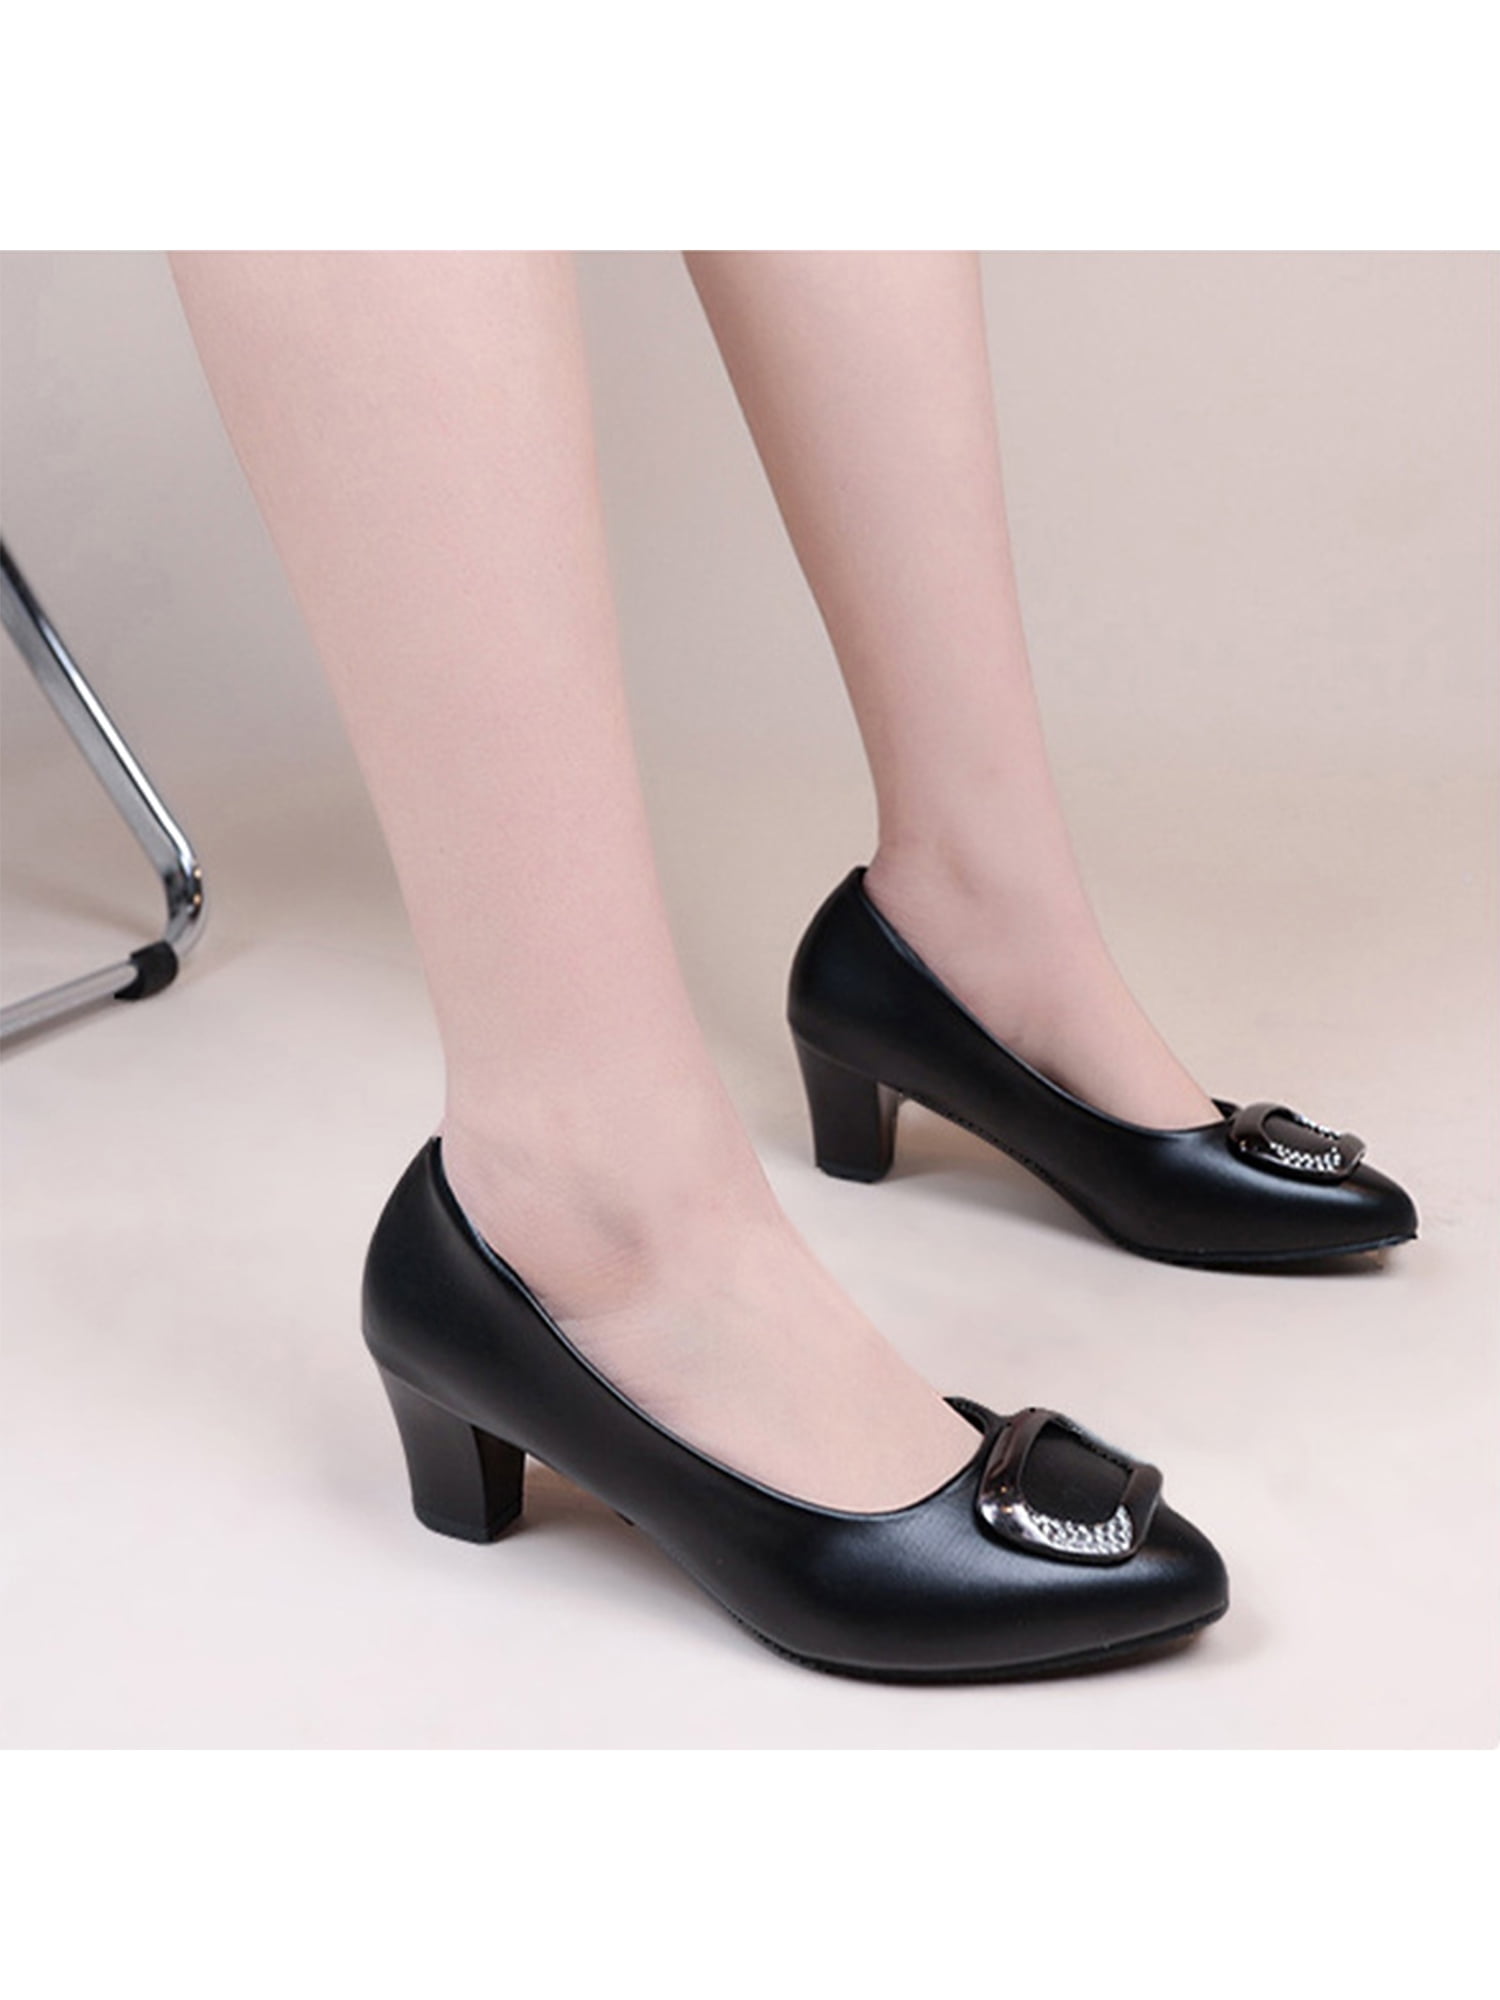 Women's Kitten Heels Pointed Closed Toe Pumps Wedding Office Work  Comfortable Low Heel Dress Shoes for Women with Cushioned Inner Sole Black  5.5 - Walmart.com